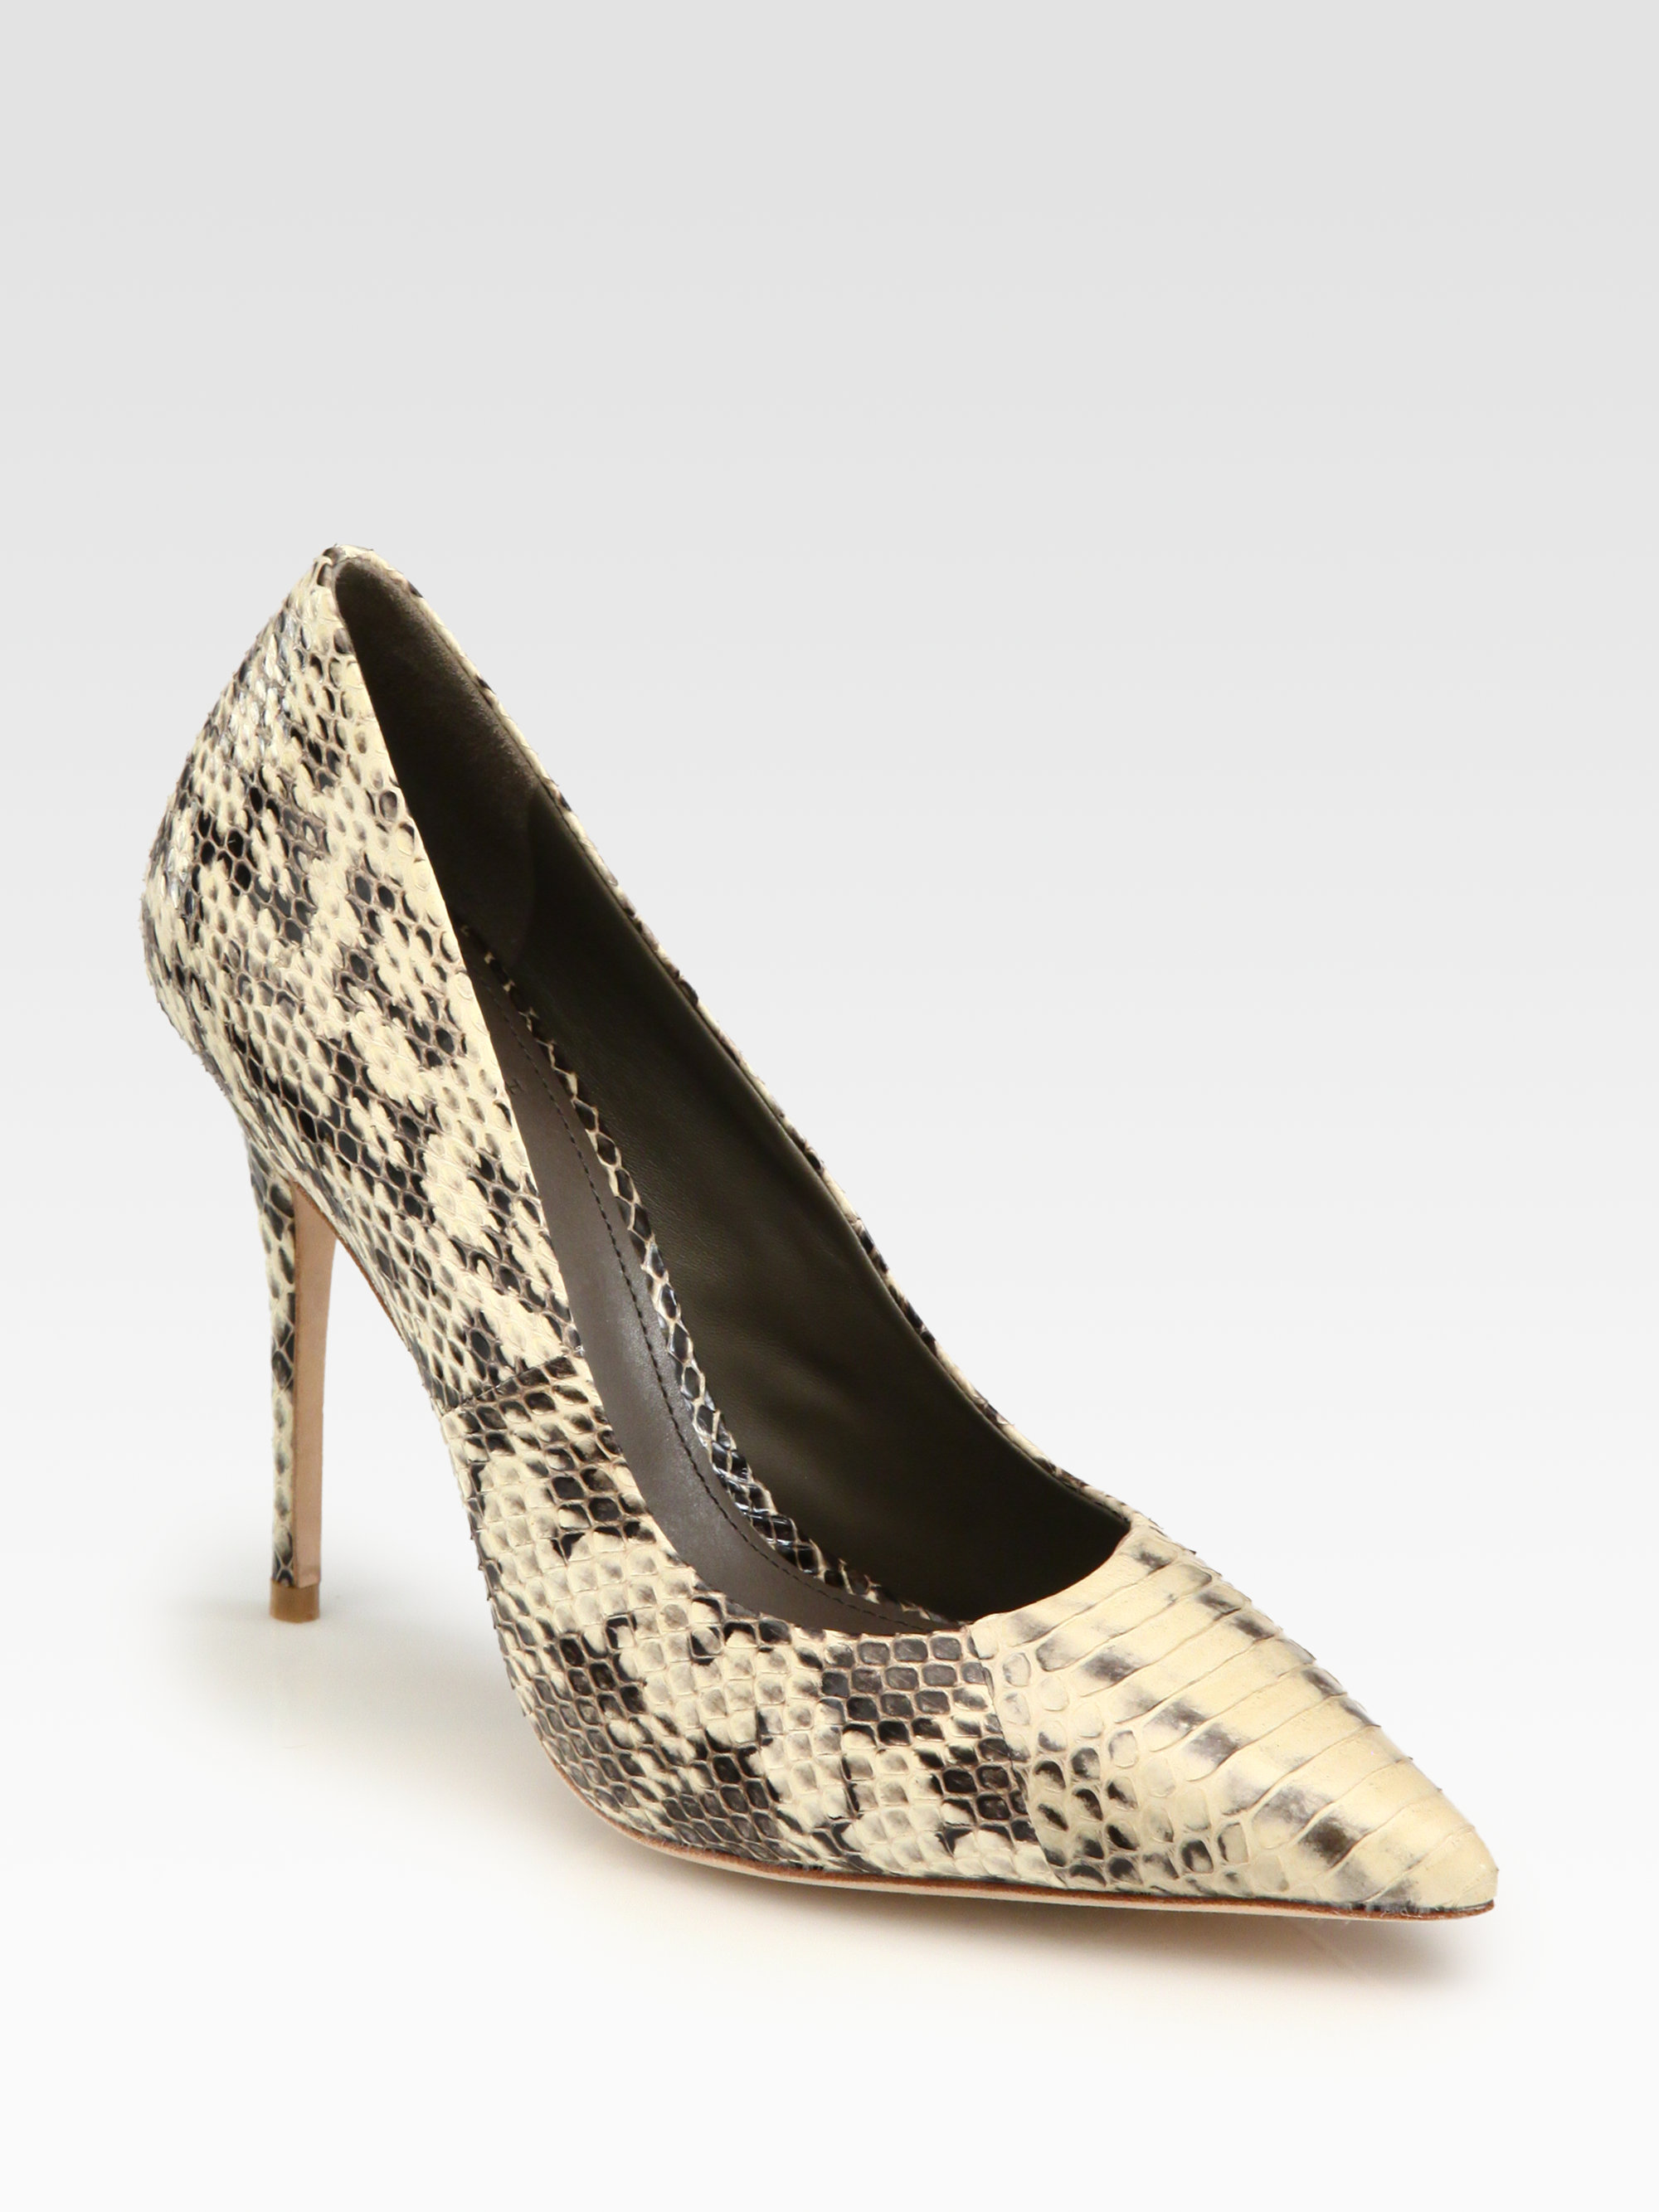 Tory Burch Cecilia Snakeskin Pumps in Beige (natural) | Lyst